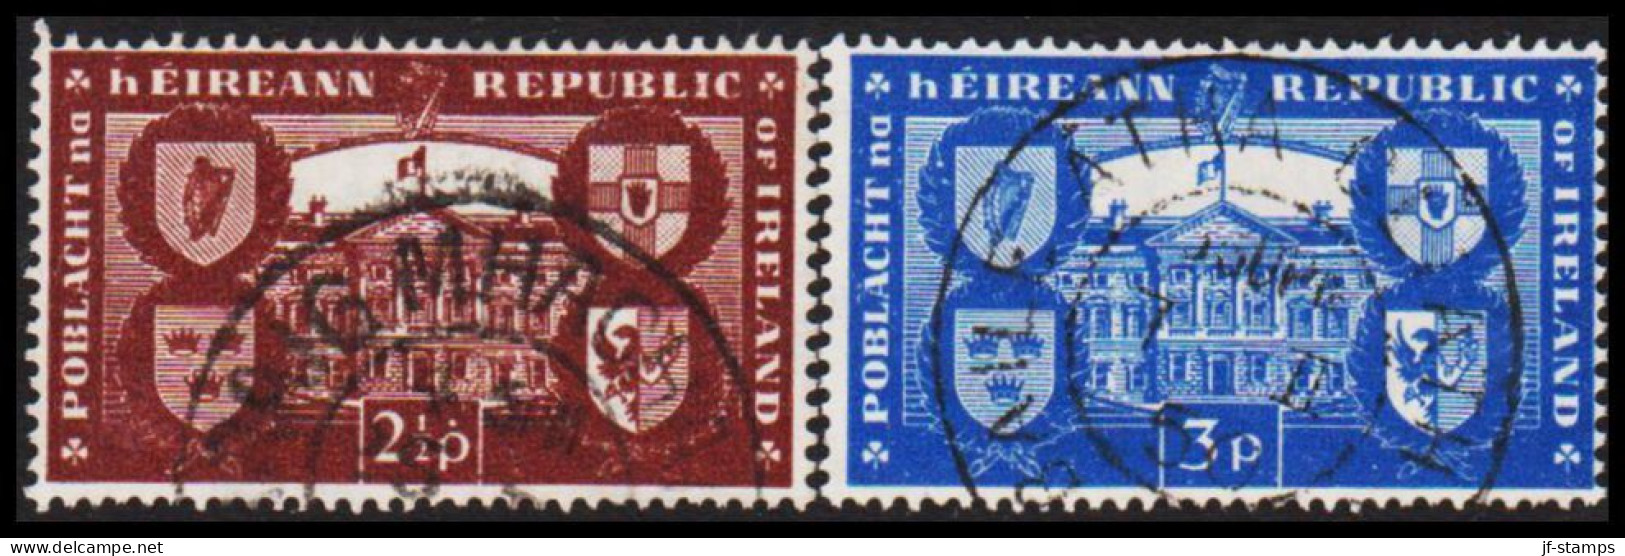 1949. EIRE. Republik Irland In Complete Set.  (Michel 108-109) - JF544521 - Used Stamps